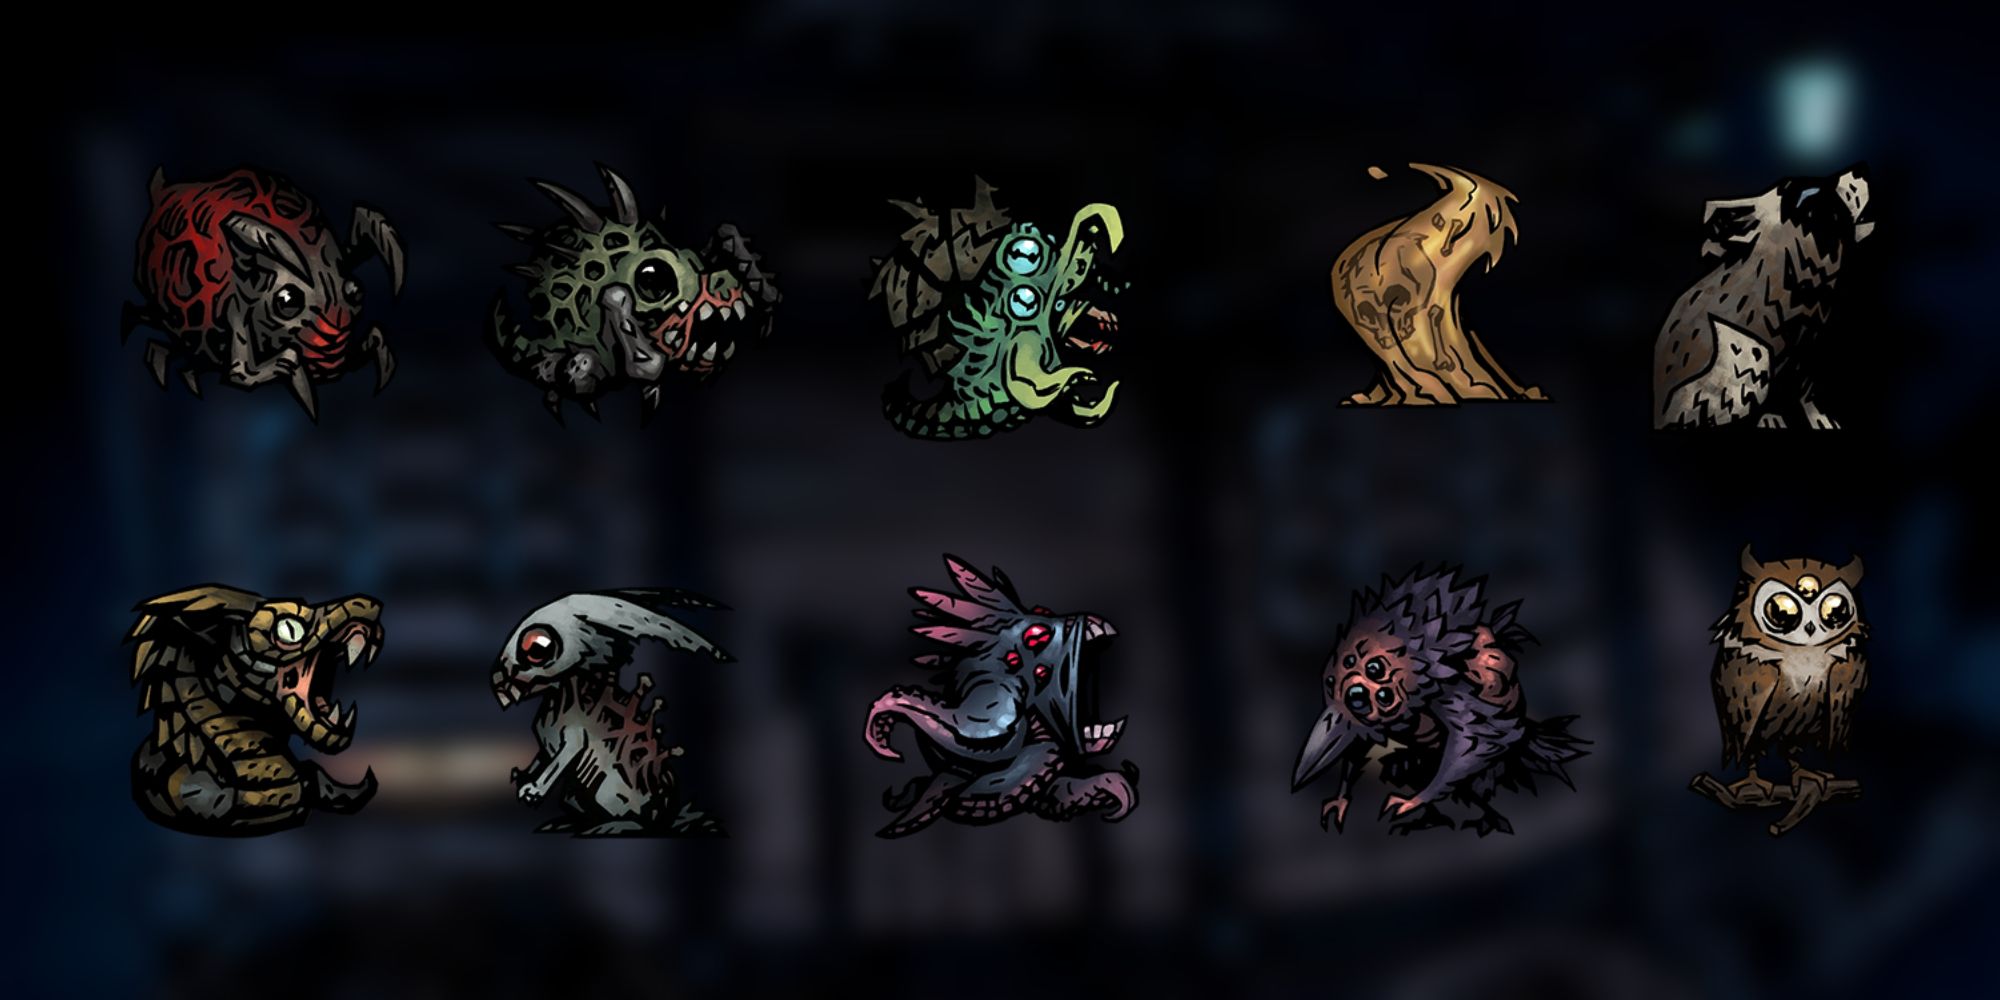 Images of all ten Pets available in Darkest Dungeon 2